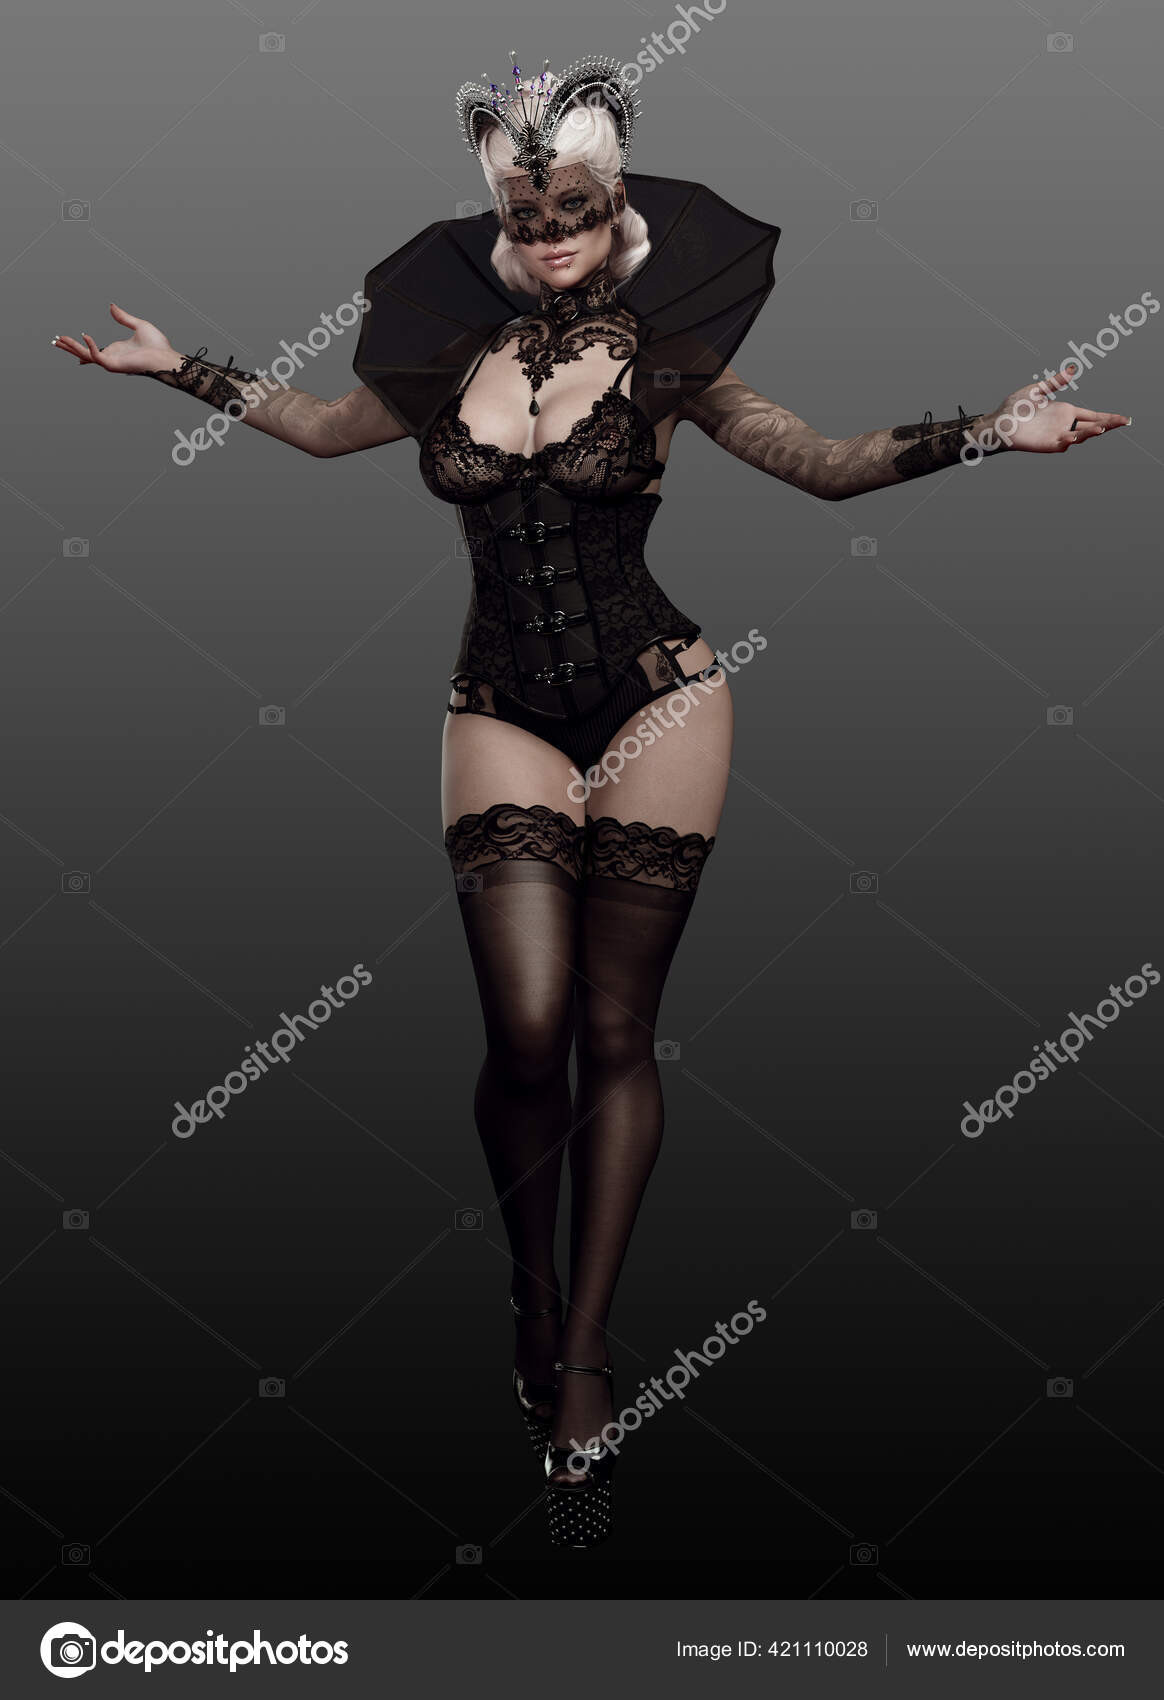 Lizzy Wurst Toples Corset Goth Model